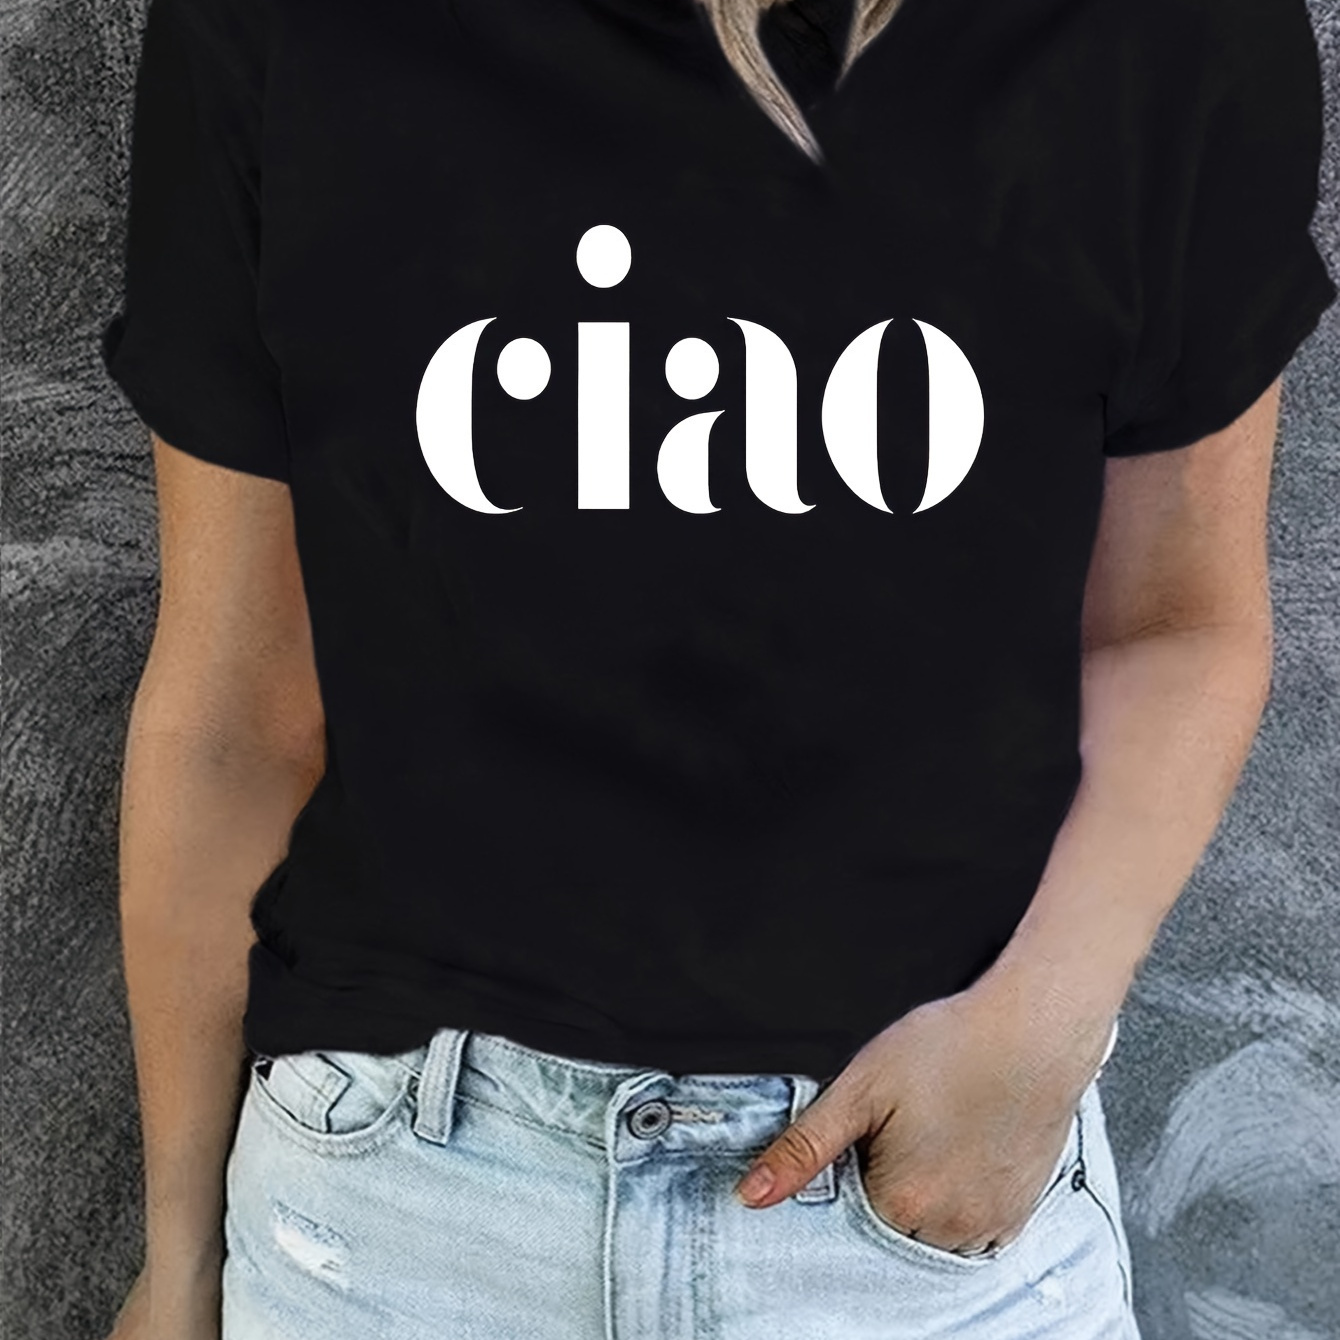 

Ciao Print T-shirt, Short Sleeve Crew Neck Casual Top For Summer & Spring, Women's Clothing